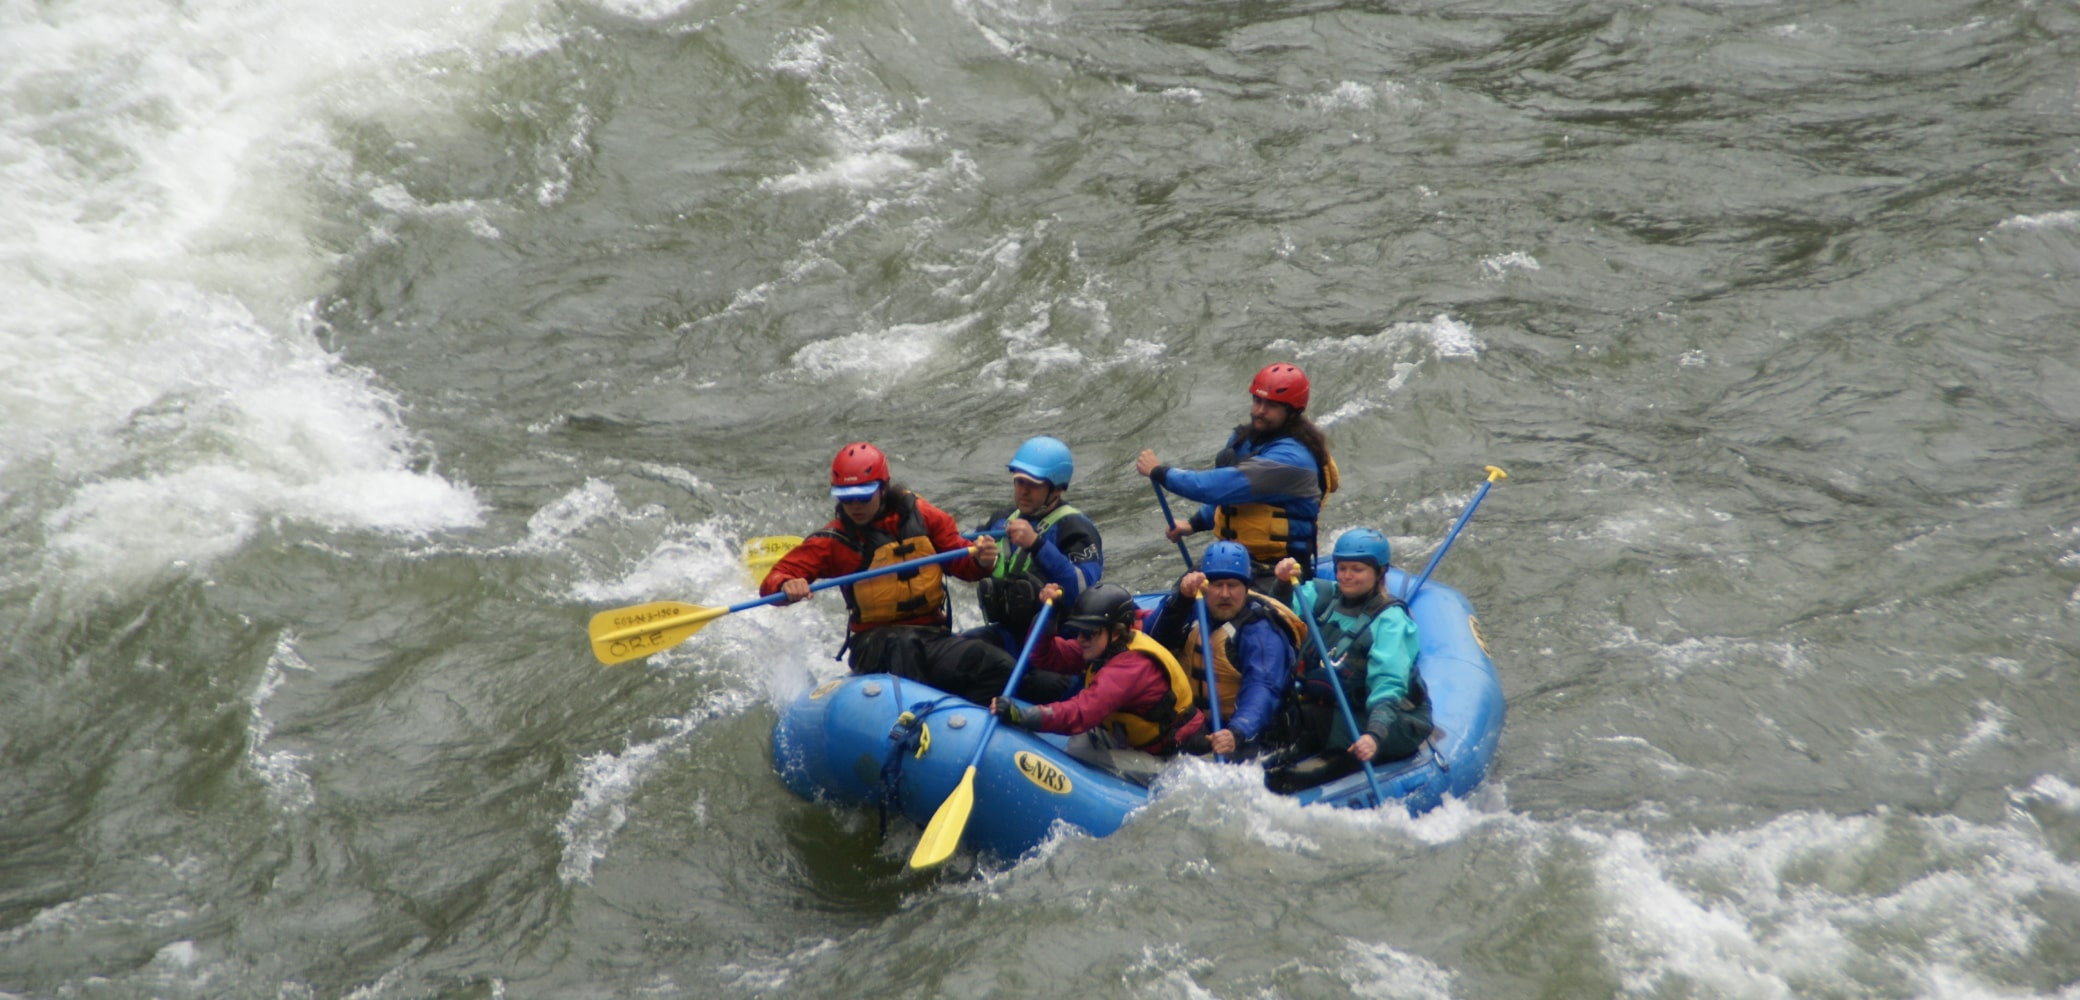 A group of 5 guided white water rafters paddle down river in Oregon.